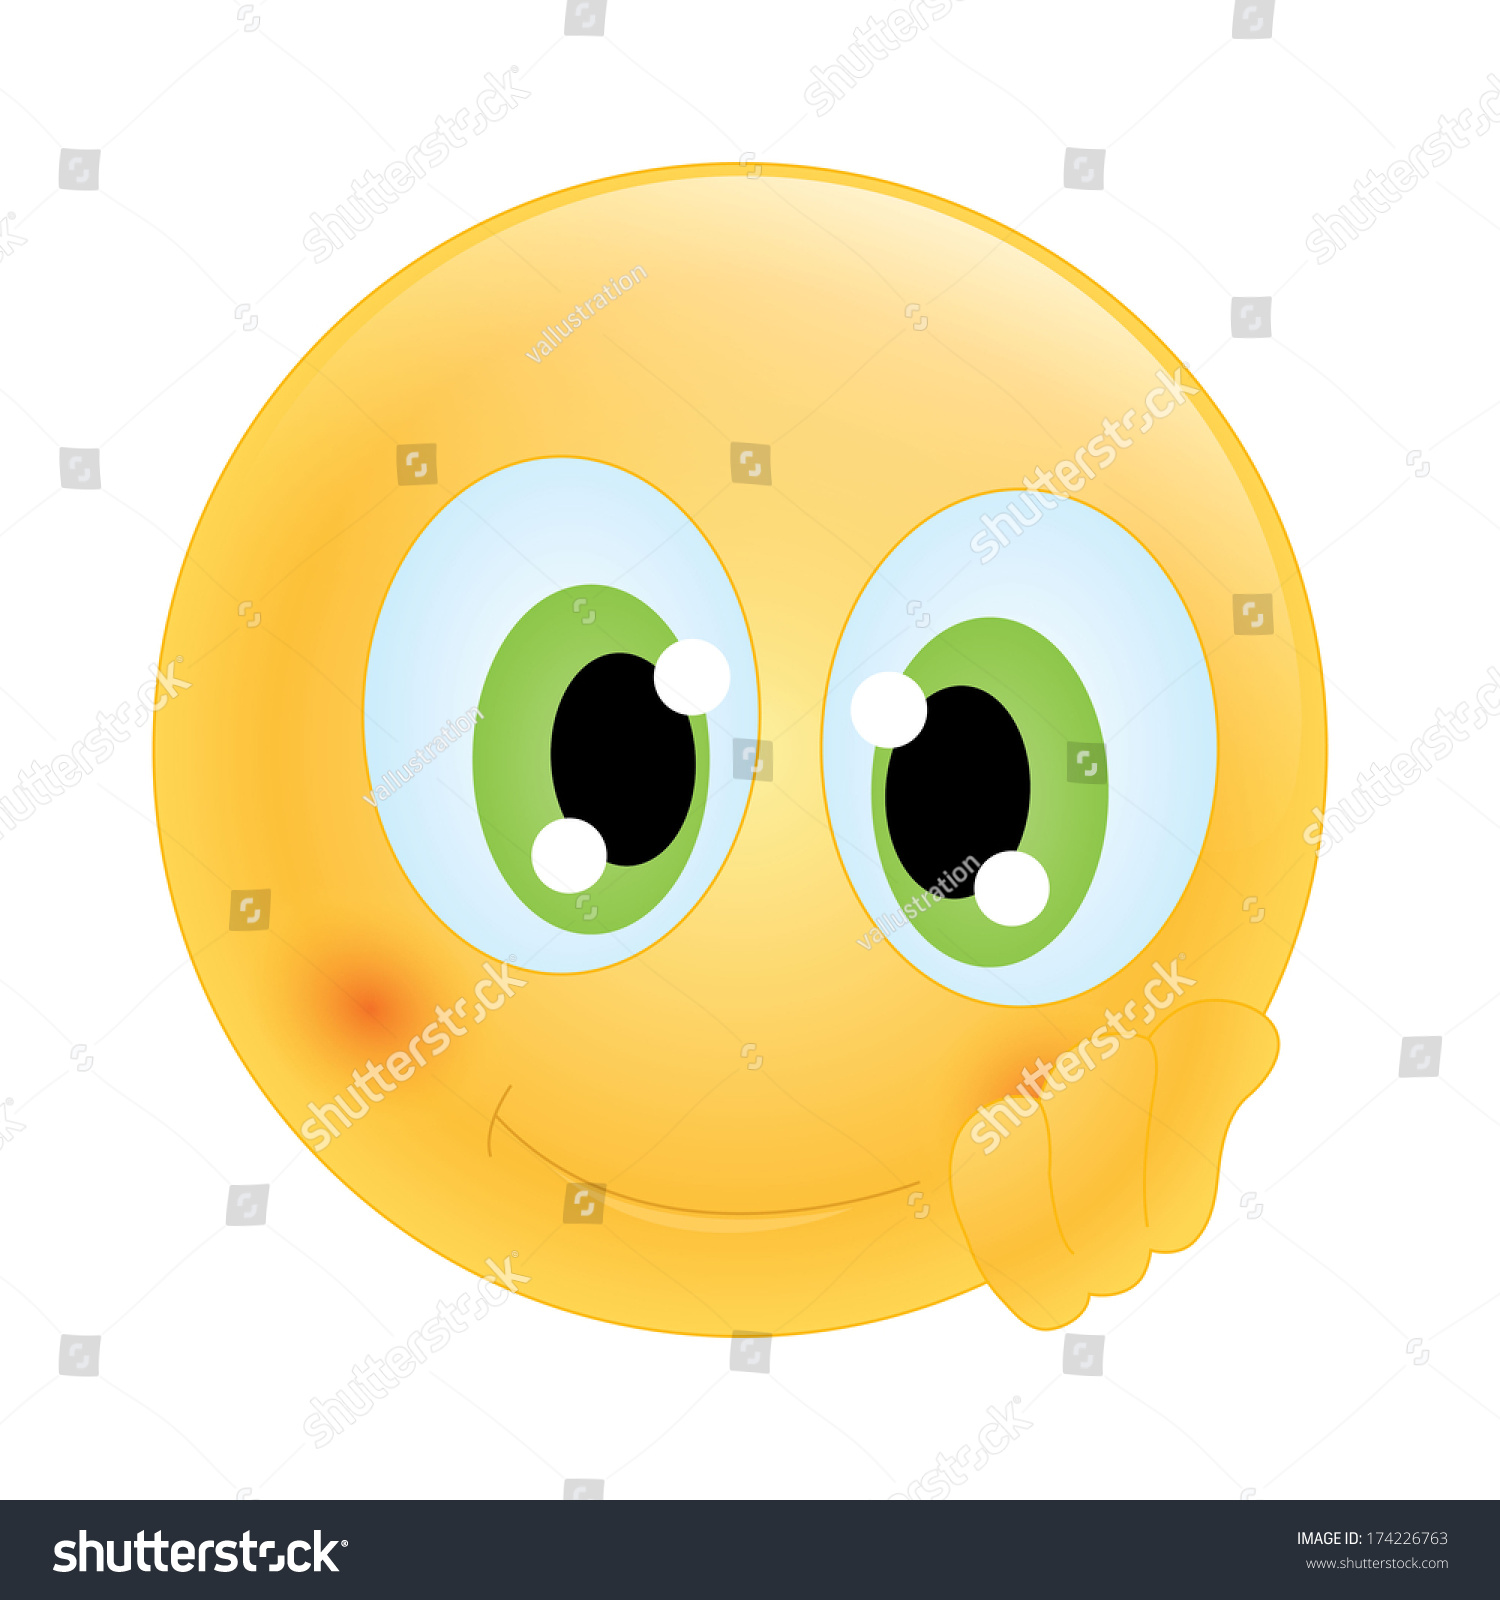 Cute Green Eyes Emoticon Day Dreaming Stock Vector Illustration ...